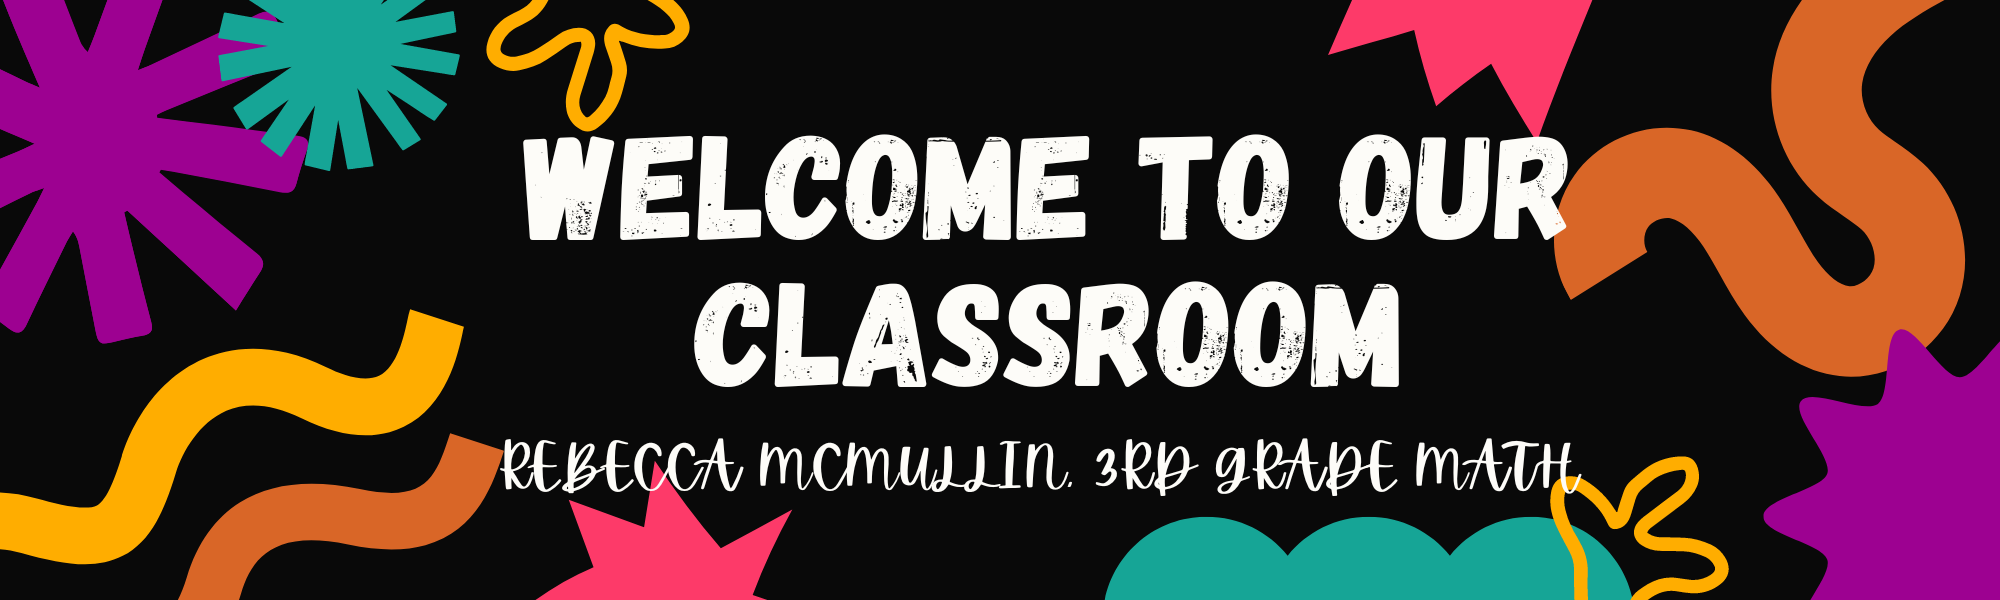 Welcome to our classroom Rebecca McMullin